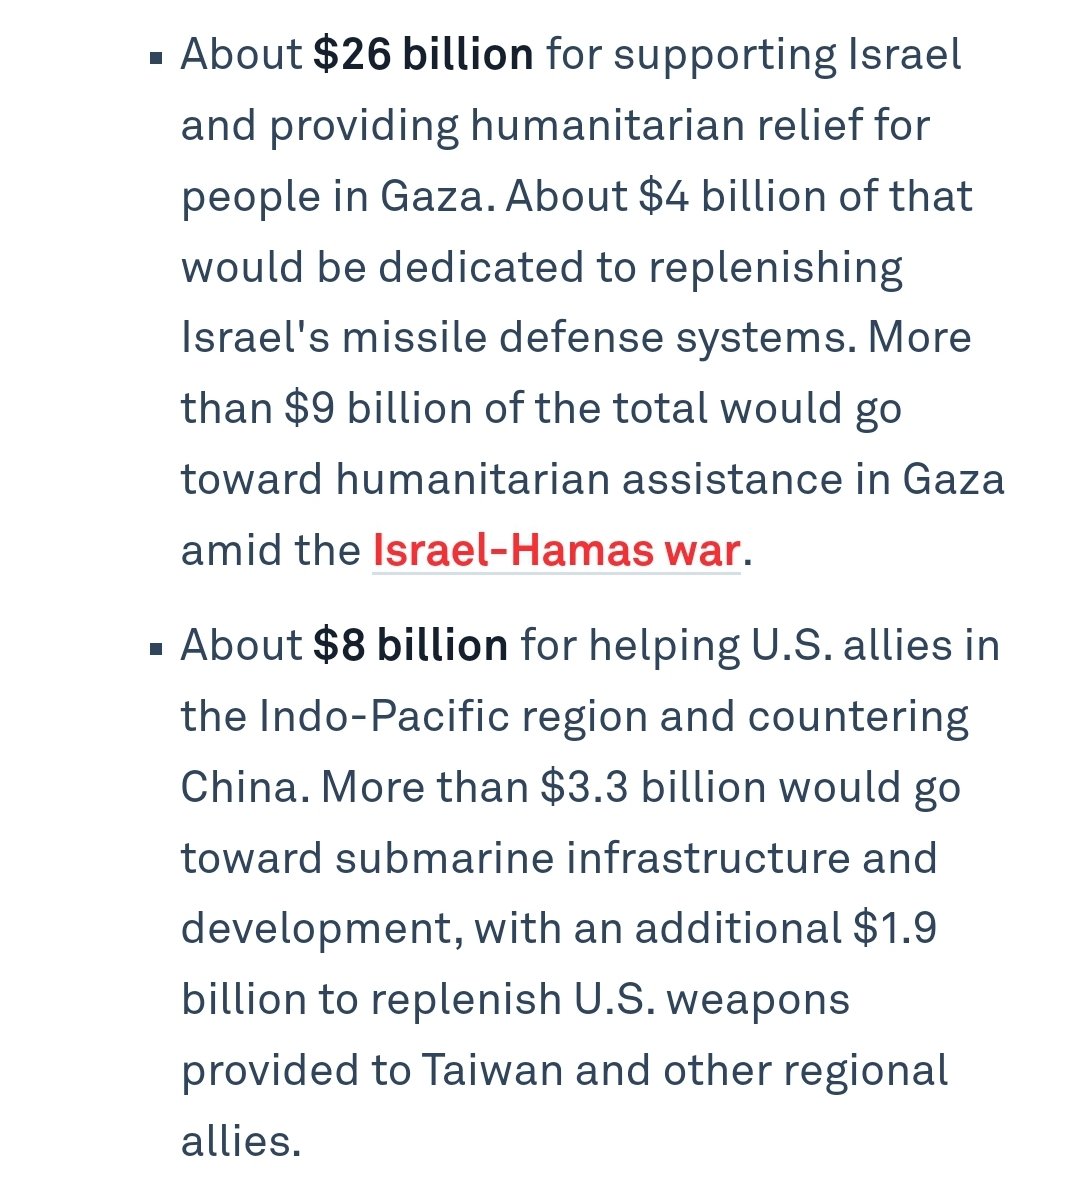 Big chunk of cash for the Palestinians in the foreign aid bill. More than we will be spending in the whole Indopacific!

You'd never know it from the Palestinian activists